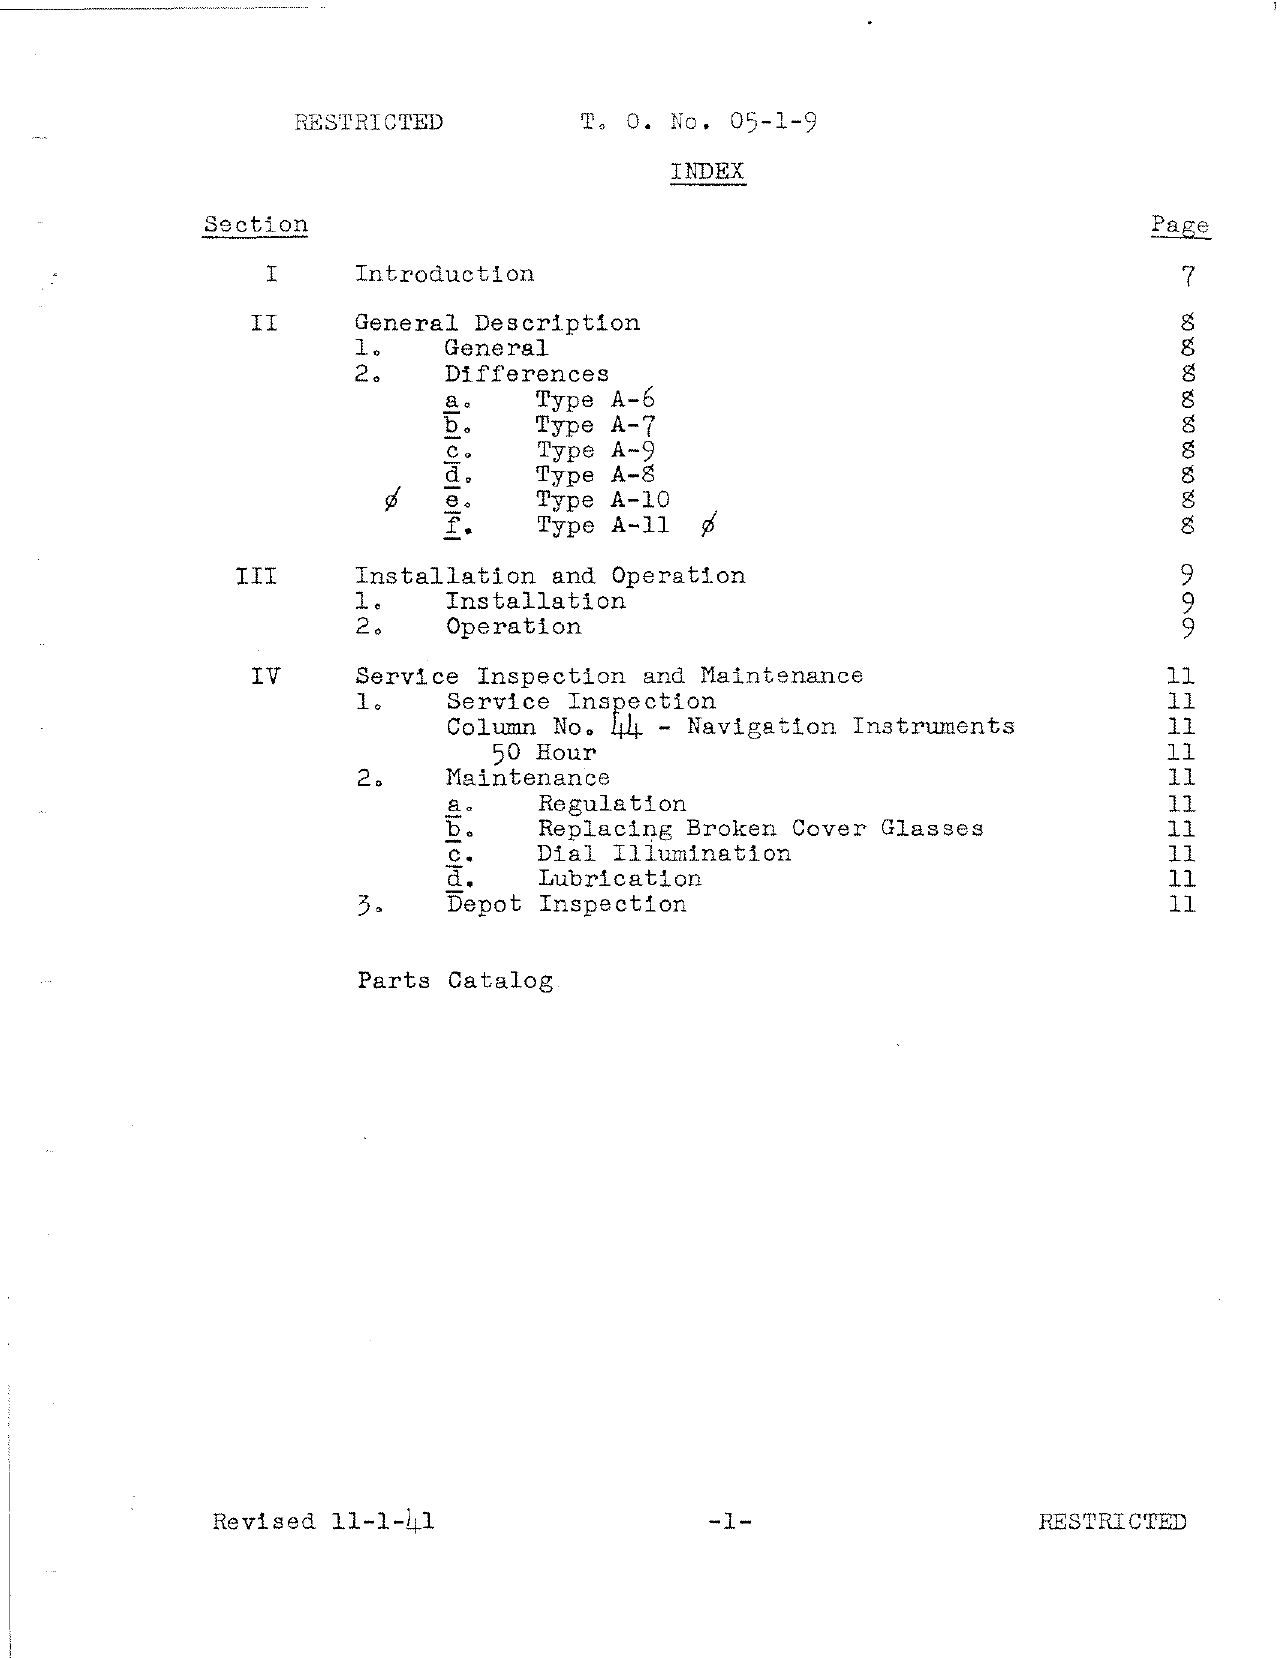 Sample page 4 from AirCorps Library document: Handbook of Instructions with Parts Catalog for Aircraft Clocks (Jaeger)